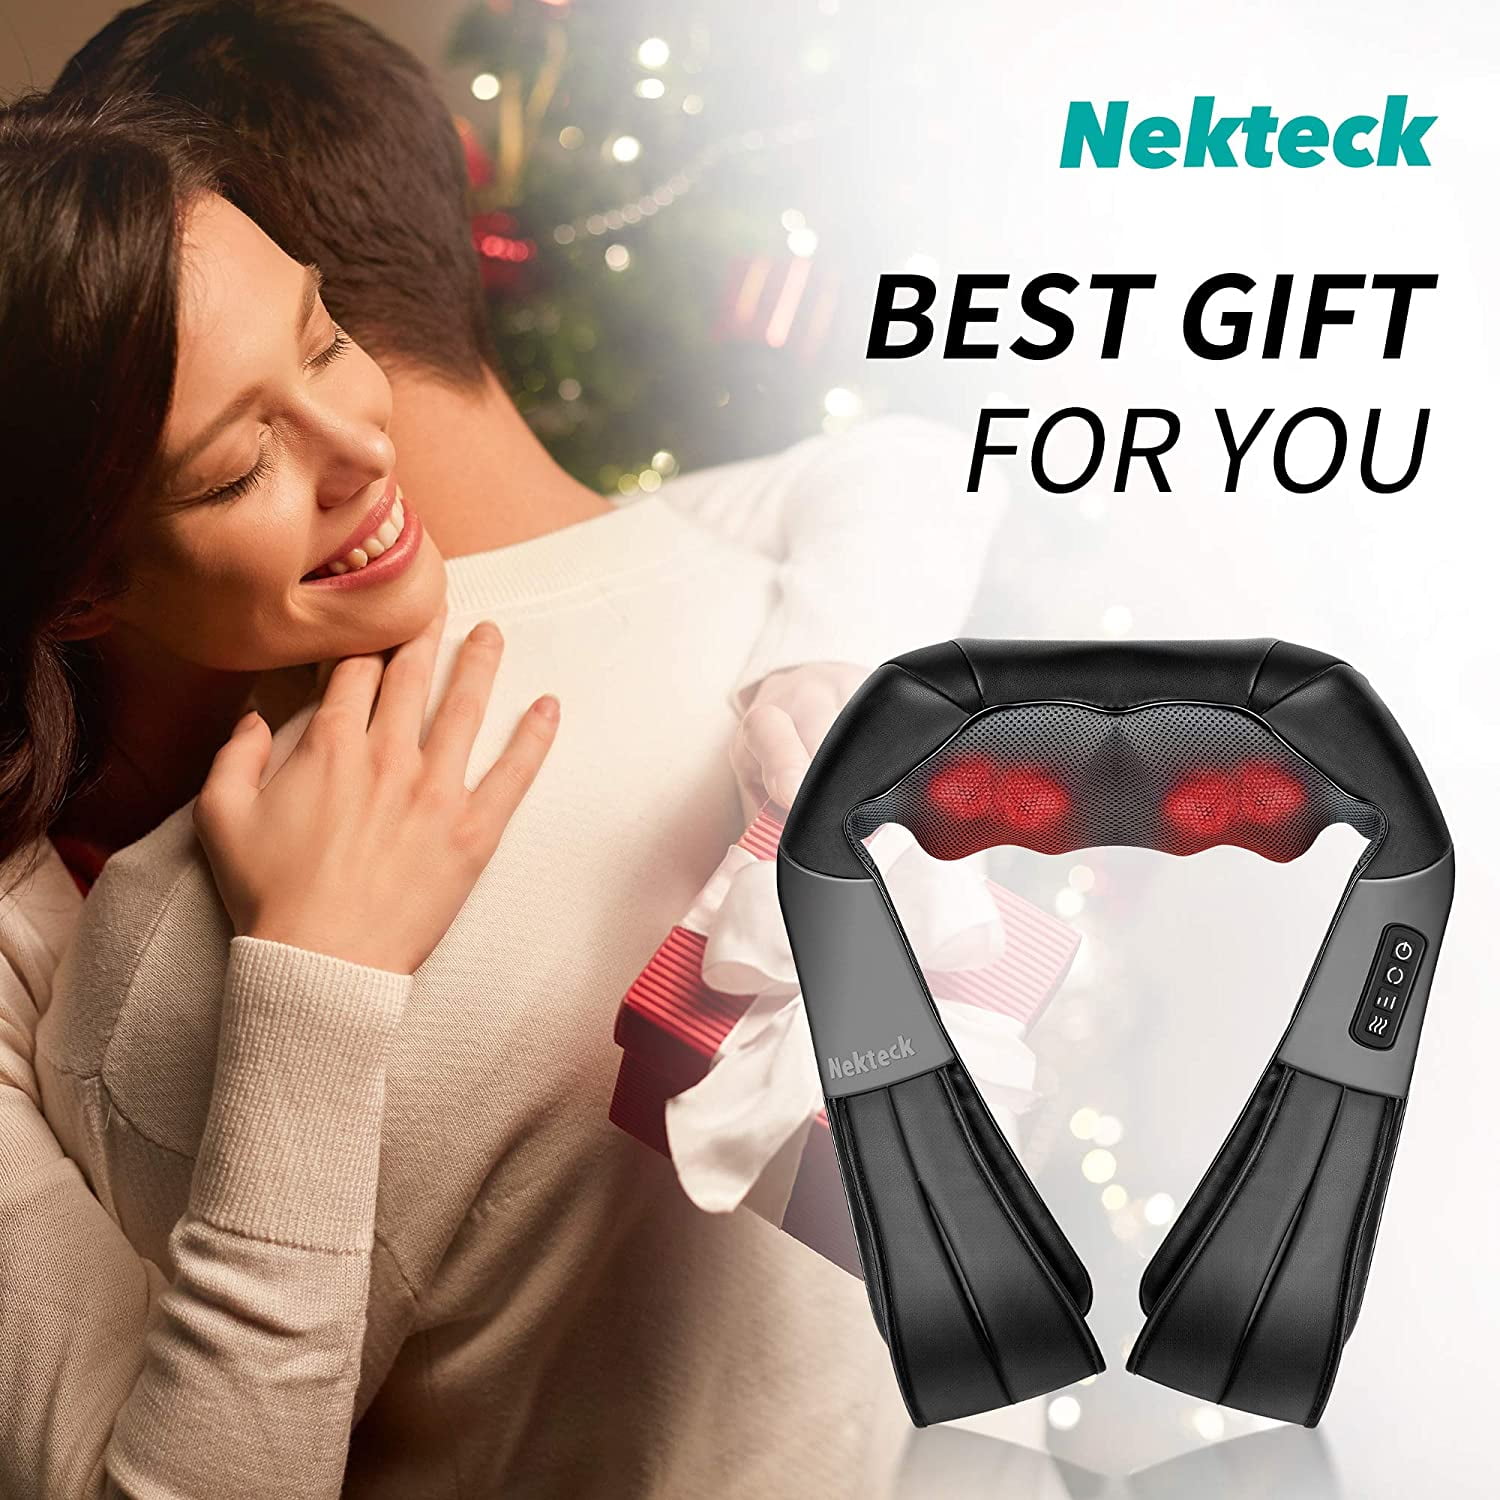 Nekteck Shiatsu Neck and Shoulder Massager with Adjustable Heat and Straps, Electric Deep Tissue 3D Kneading Massage Pillow for Neck, Back, Leg, Foot